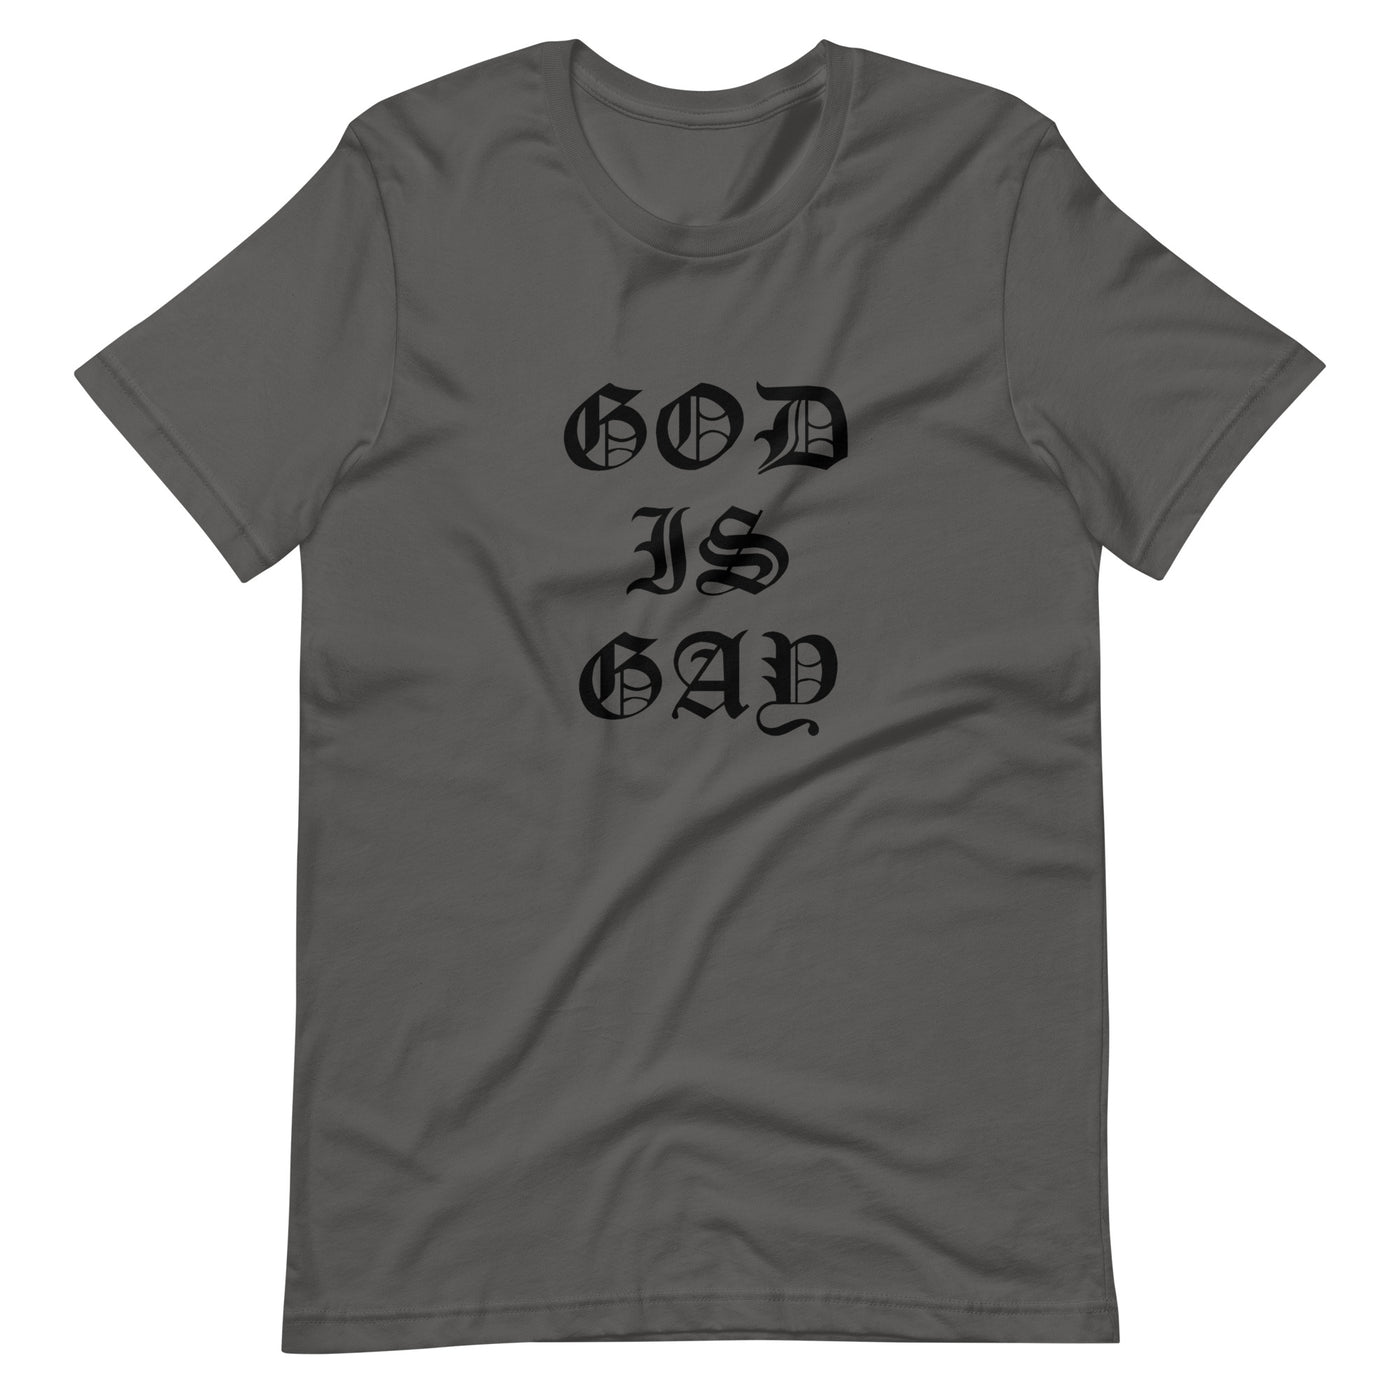 Pride Clothes - Ancient & Powerful Our God Is Gay Pride Merch T-Shirt - Asphalt